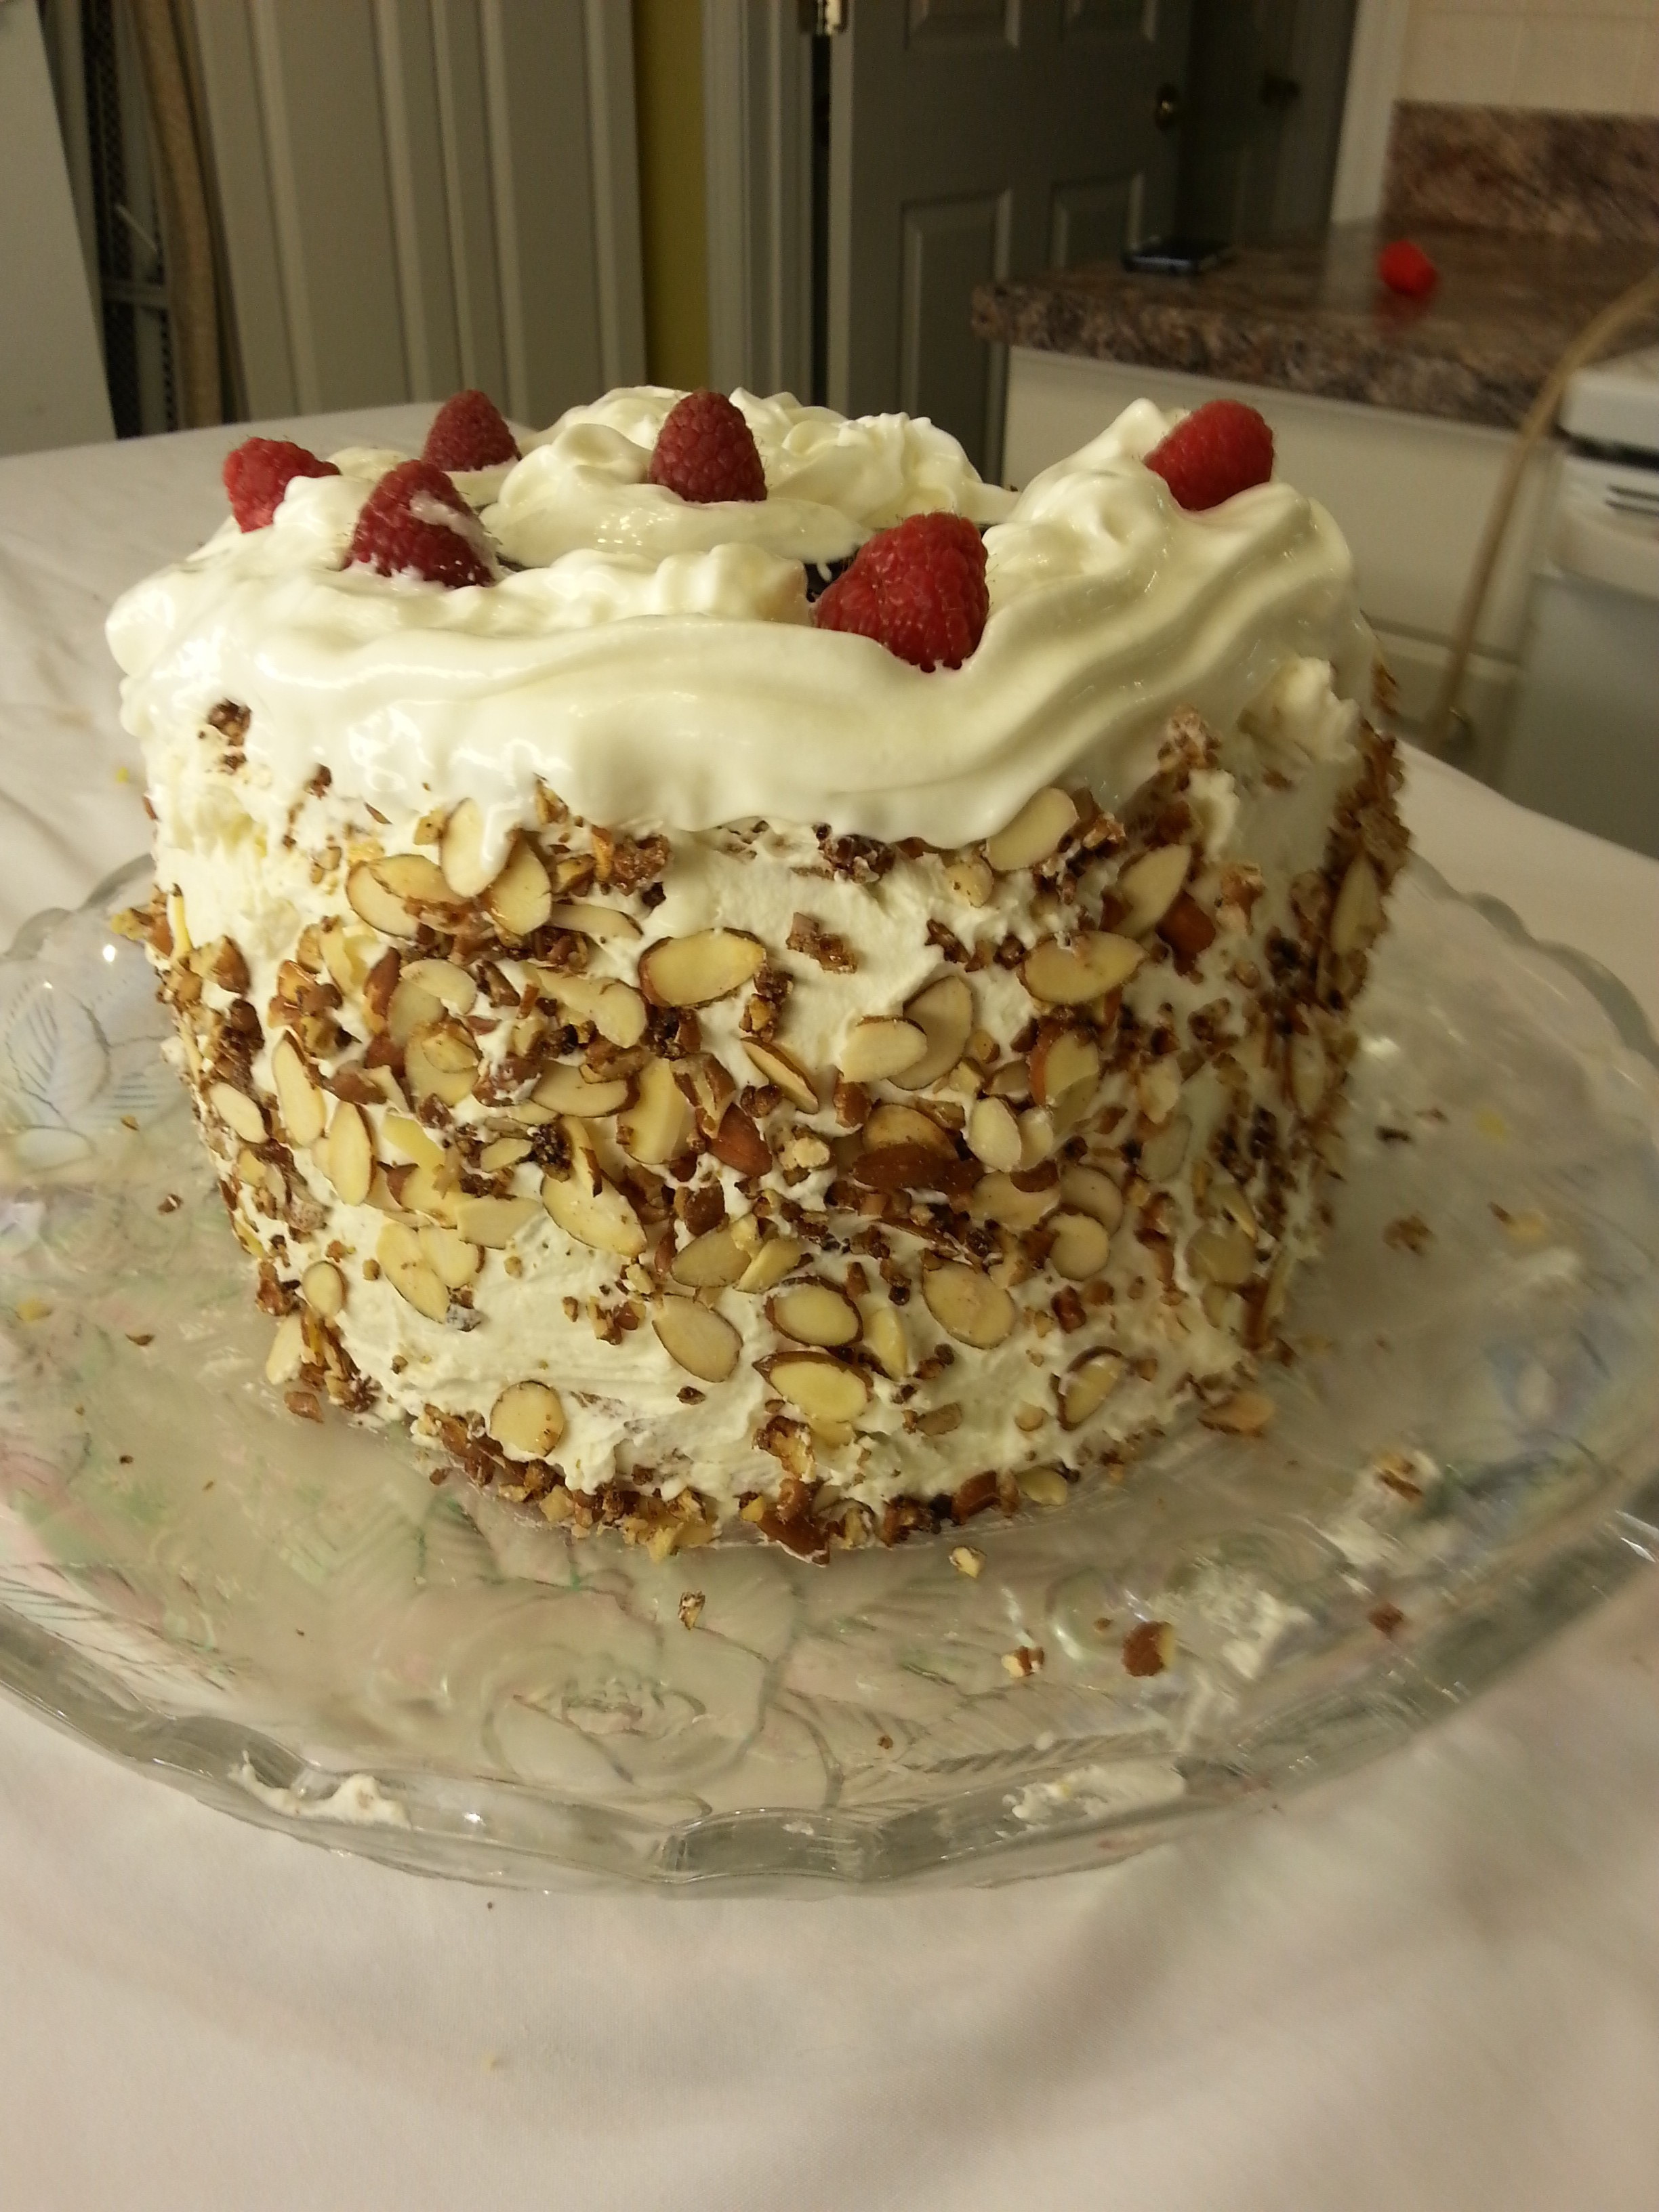 A cake with white frosting and nuts on top.